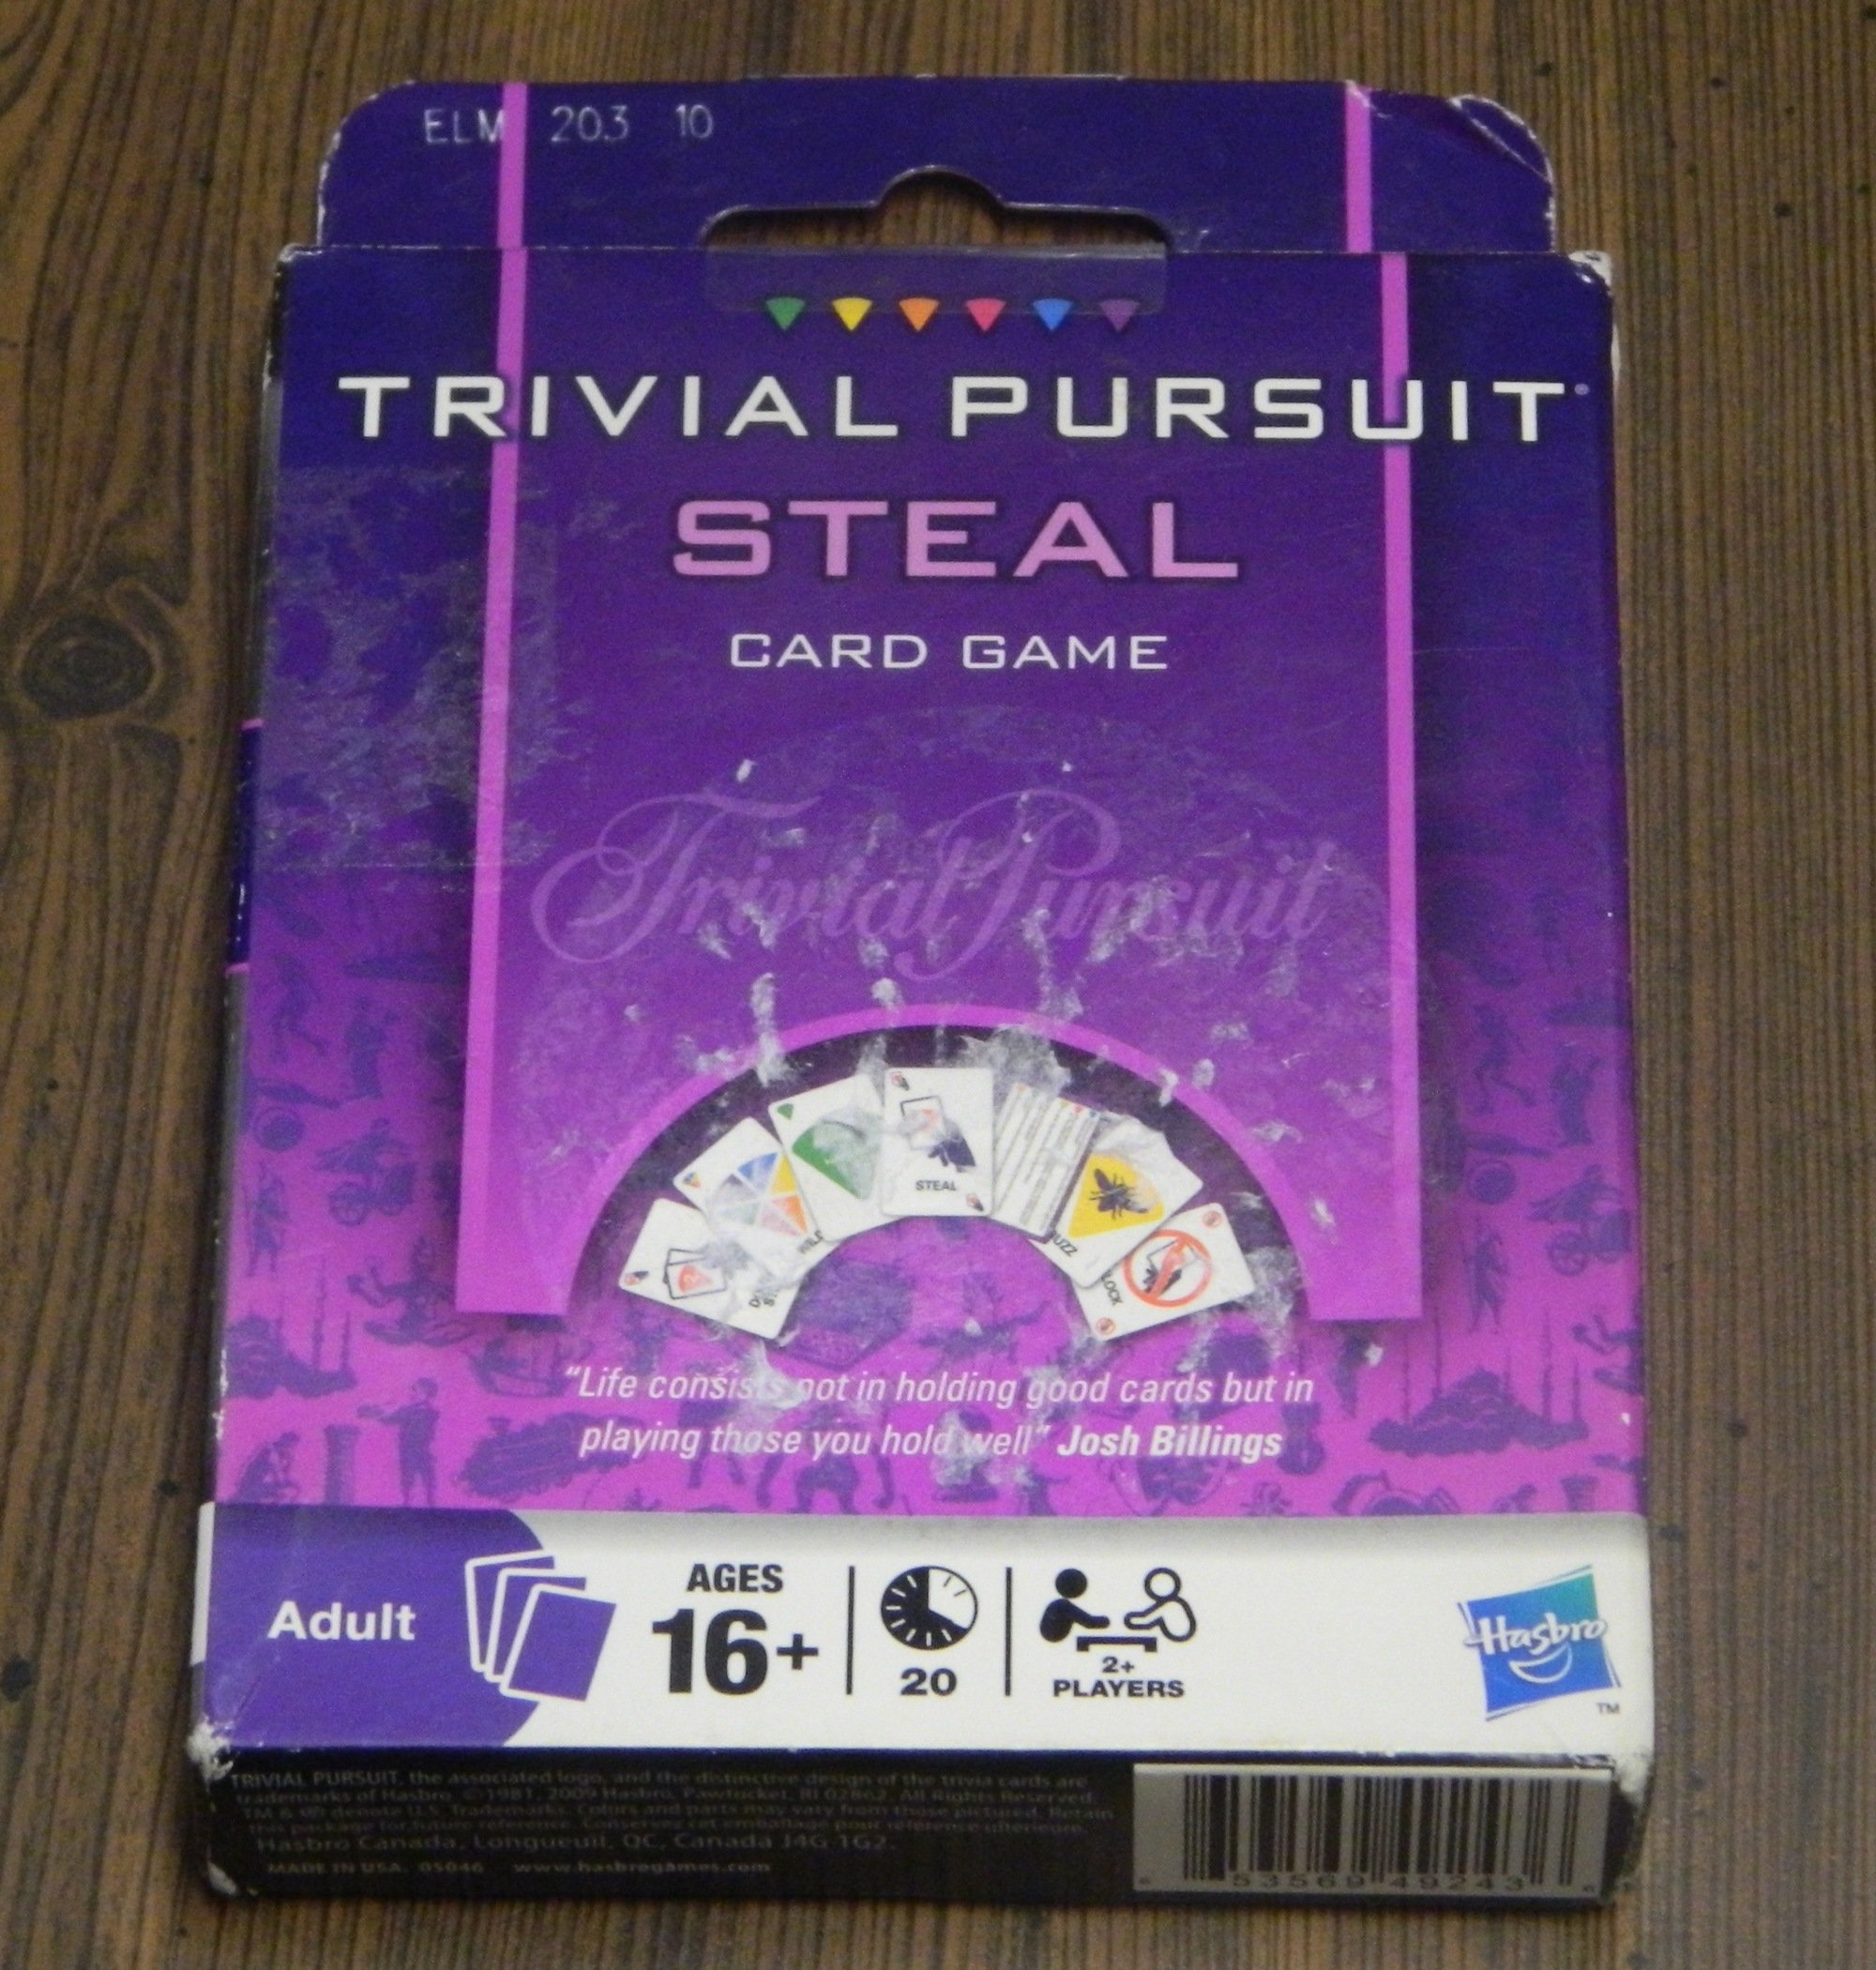 Trivial Pursuit Steal Card Game Box